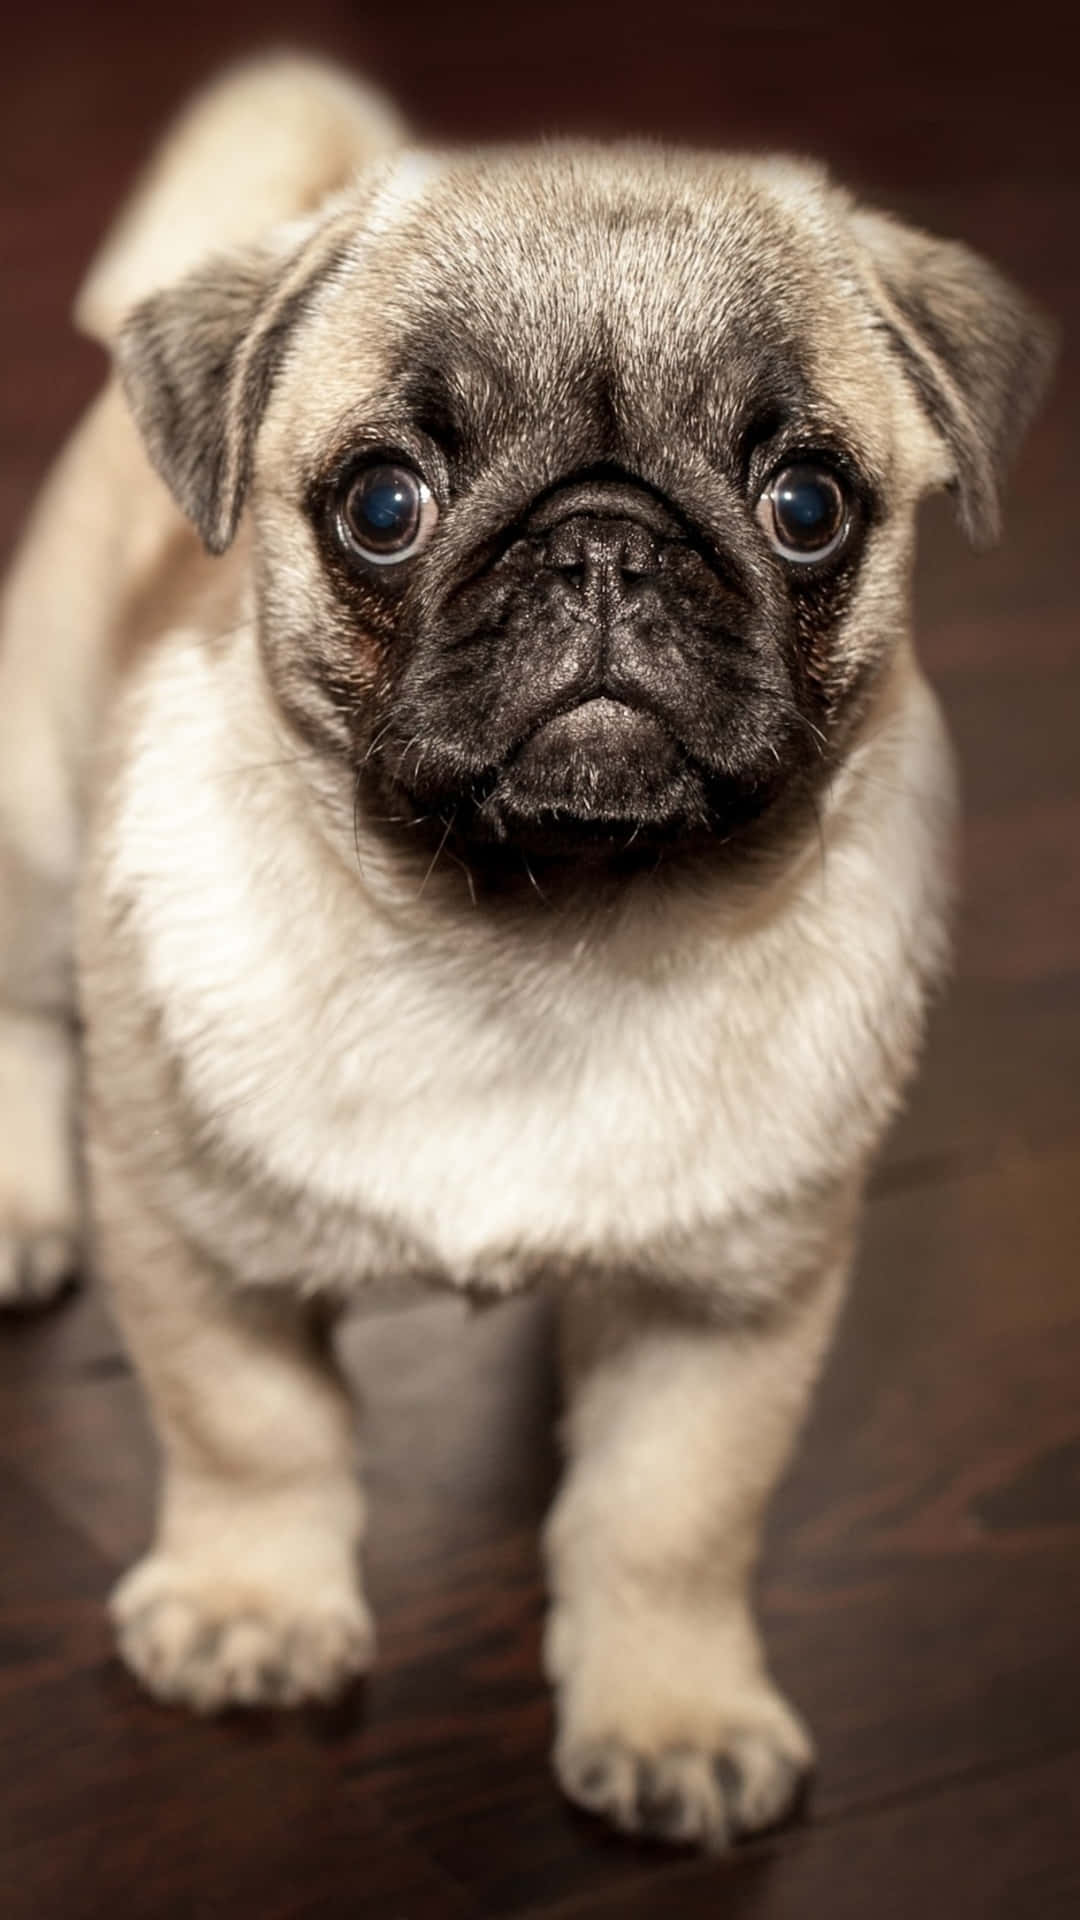 A Small Pug Dog Is Standing On A Wooden Floor Background